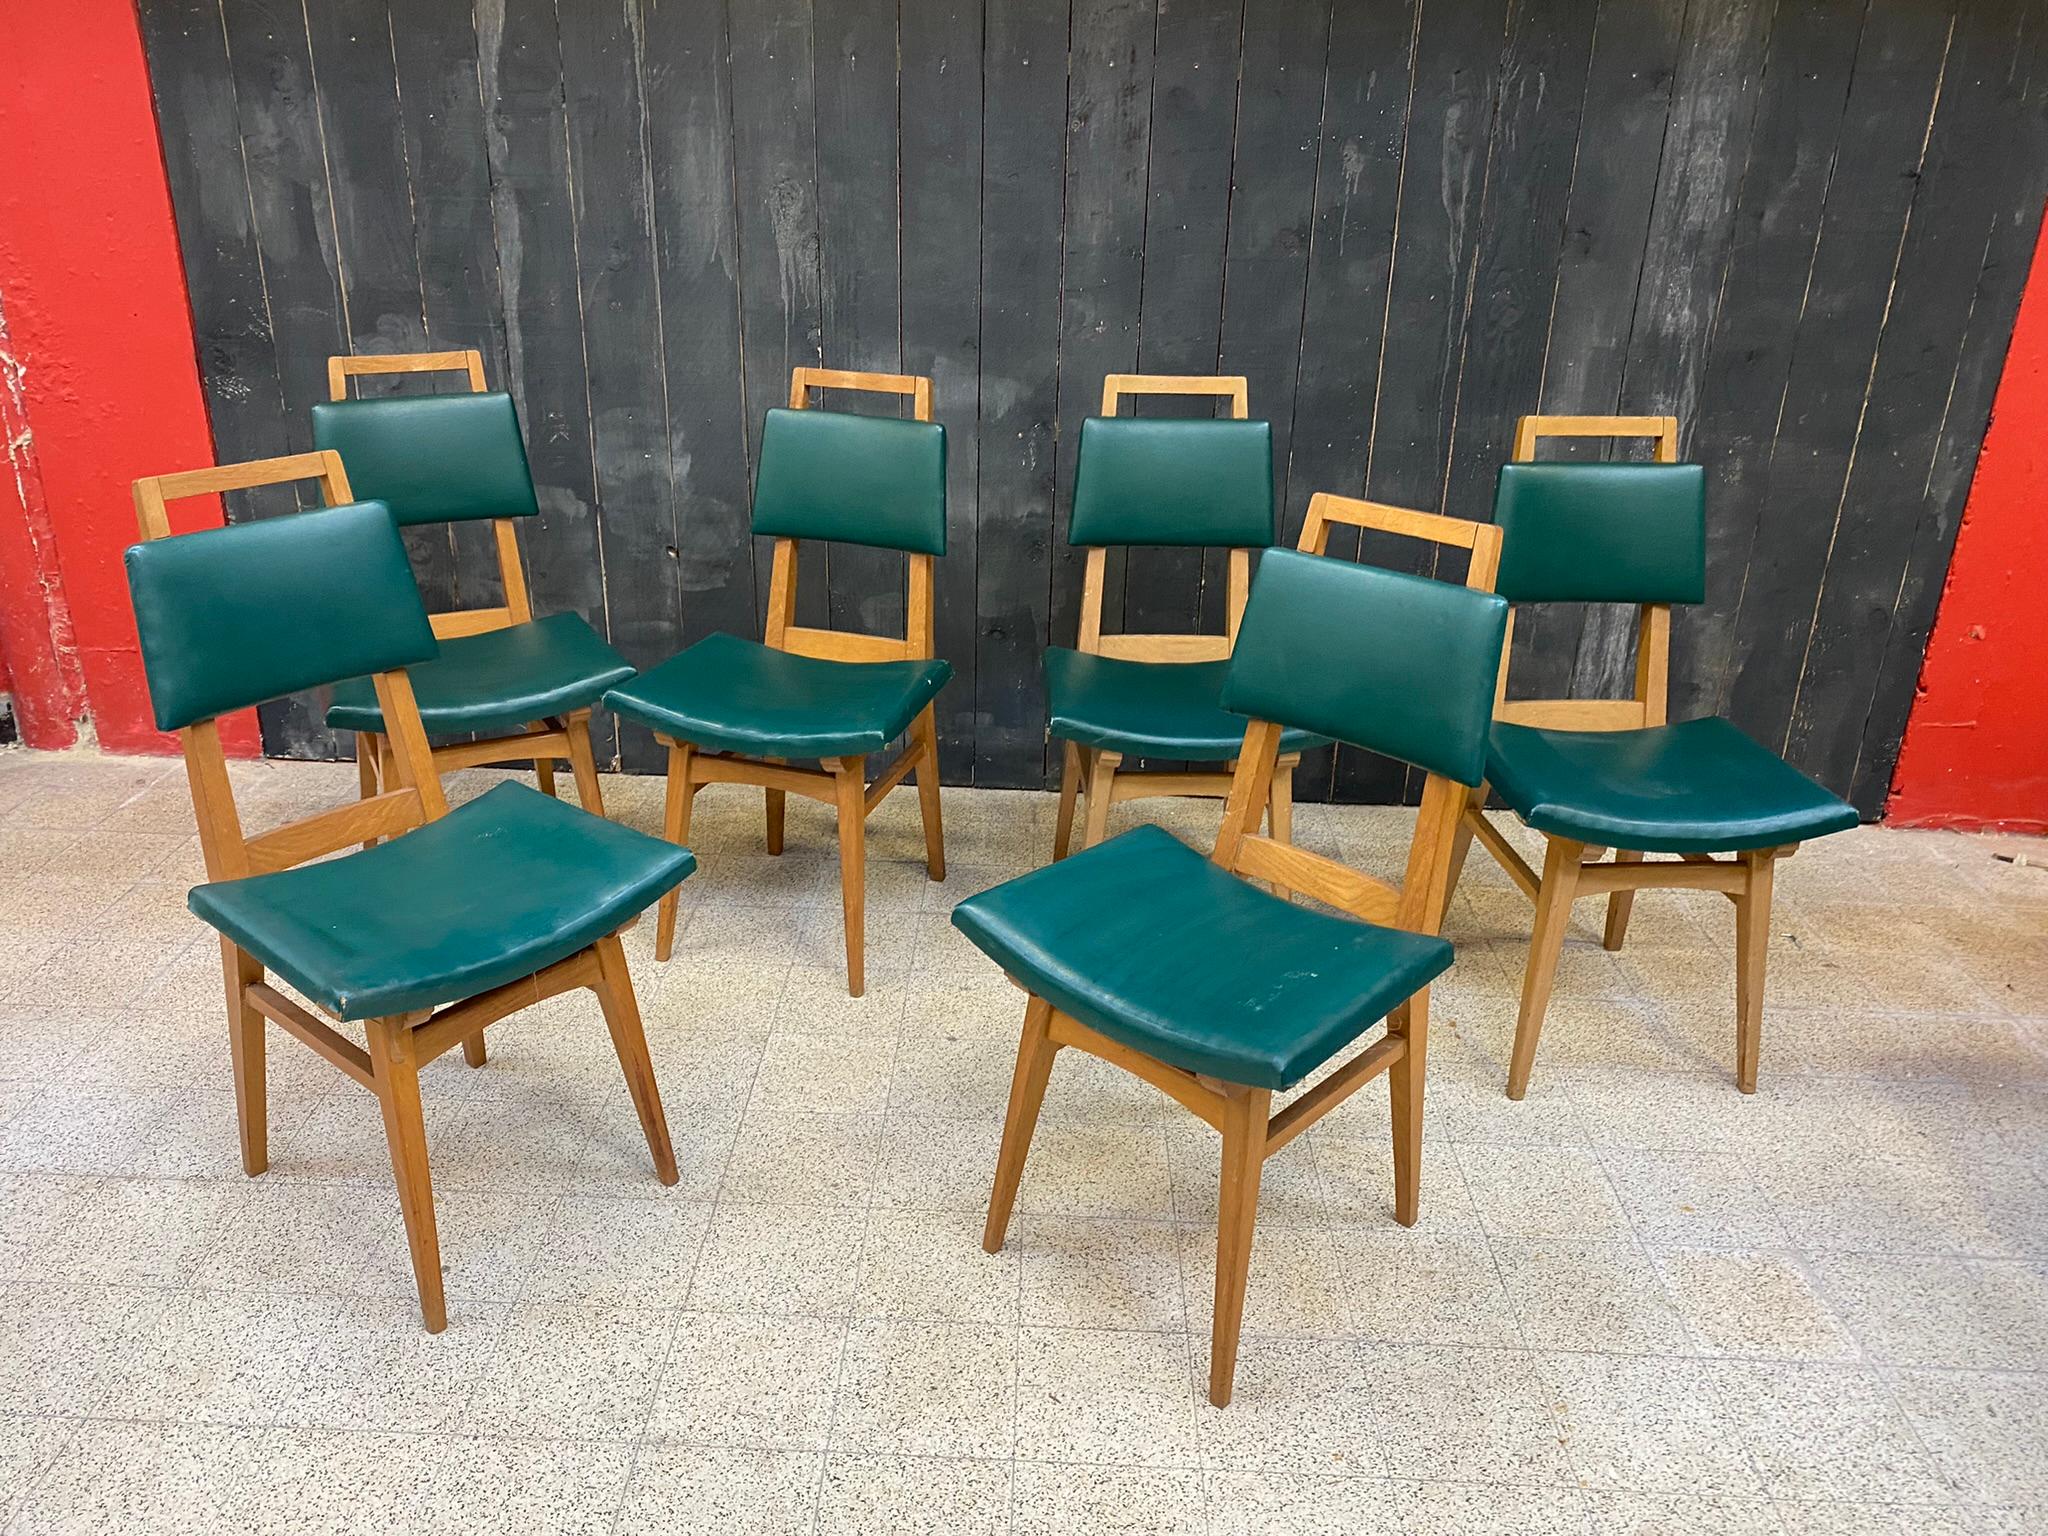 Suite of 6 oak chairs, France circa 1950/1960
